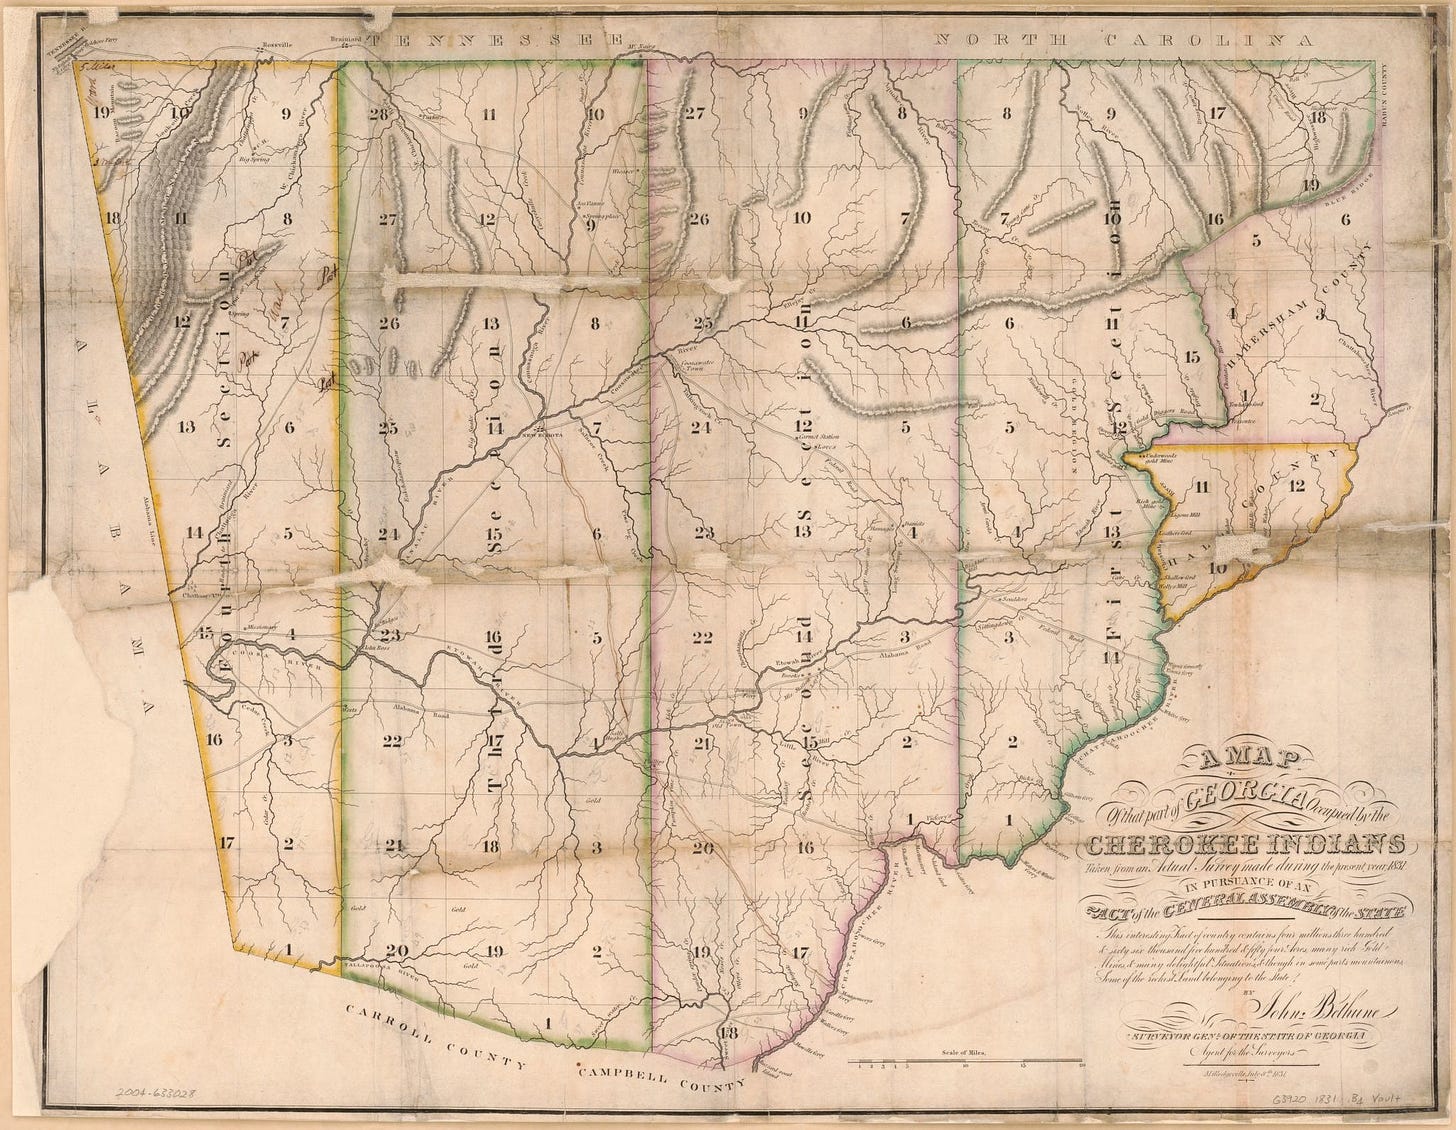 1831 Land Lottery Map published with land section numbers used to assign plots. Image below zooms in closer to show rivers as key landmarks, most of which bearing indigenous names. Published by John Bethune (1831); Library of Congress, Geography and Map Division.